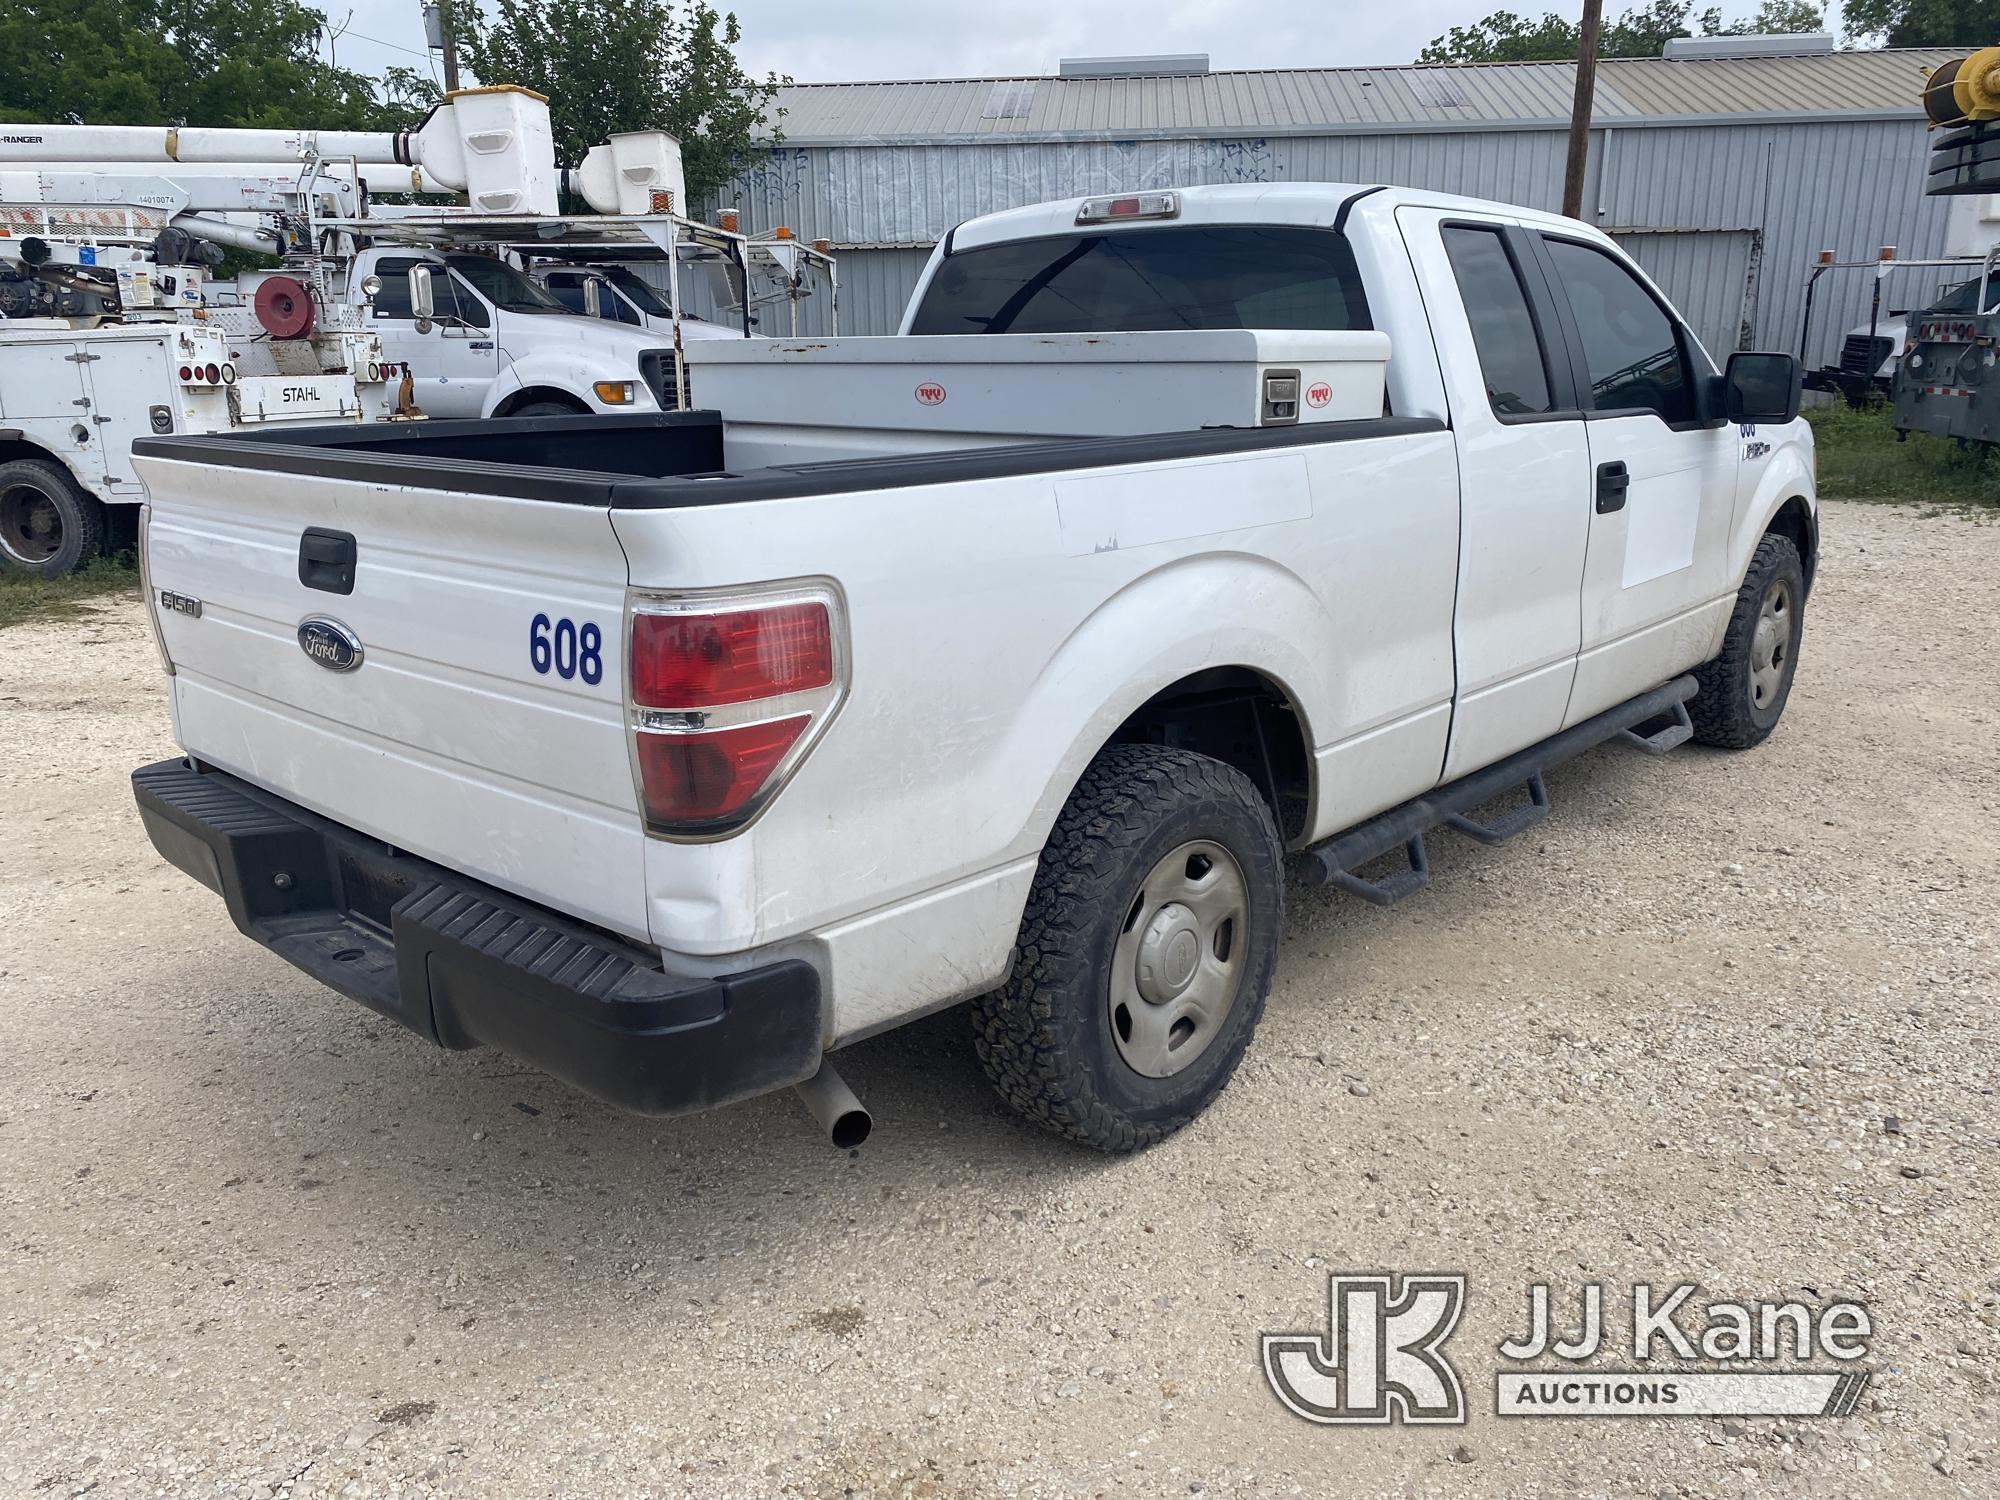 (San Antonio, TX) 2009 Ford F150 Extended-Cab Pickup Truck Runs & Moves